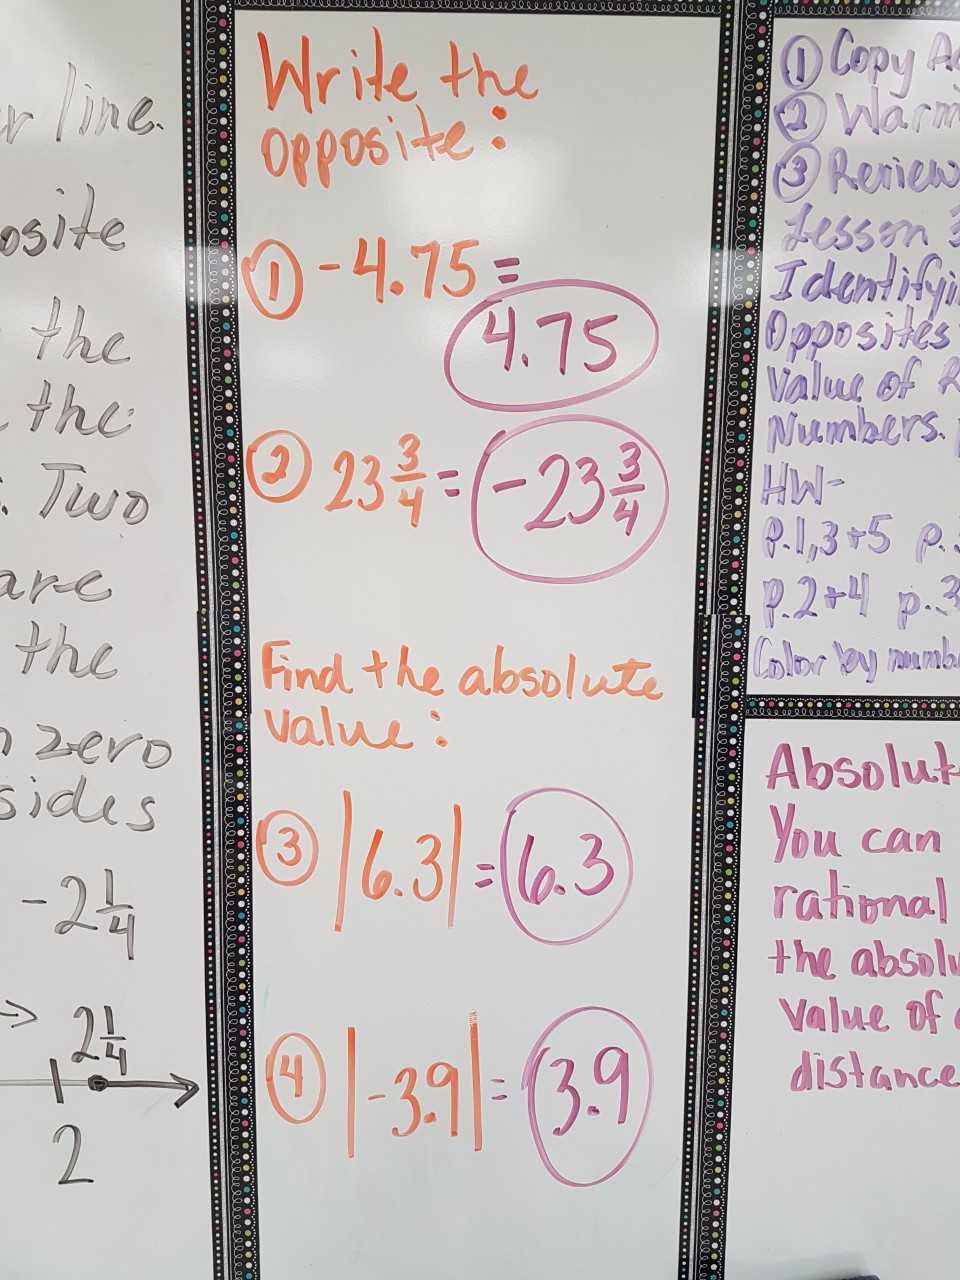 mrs-negron-6th-grade-math-class-lesson-3-2-identifying-opposites-and-absolute-value-of